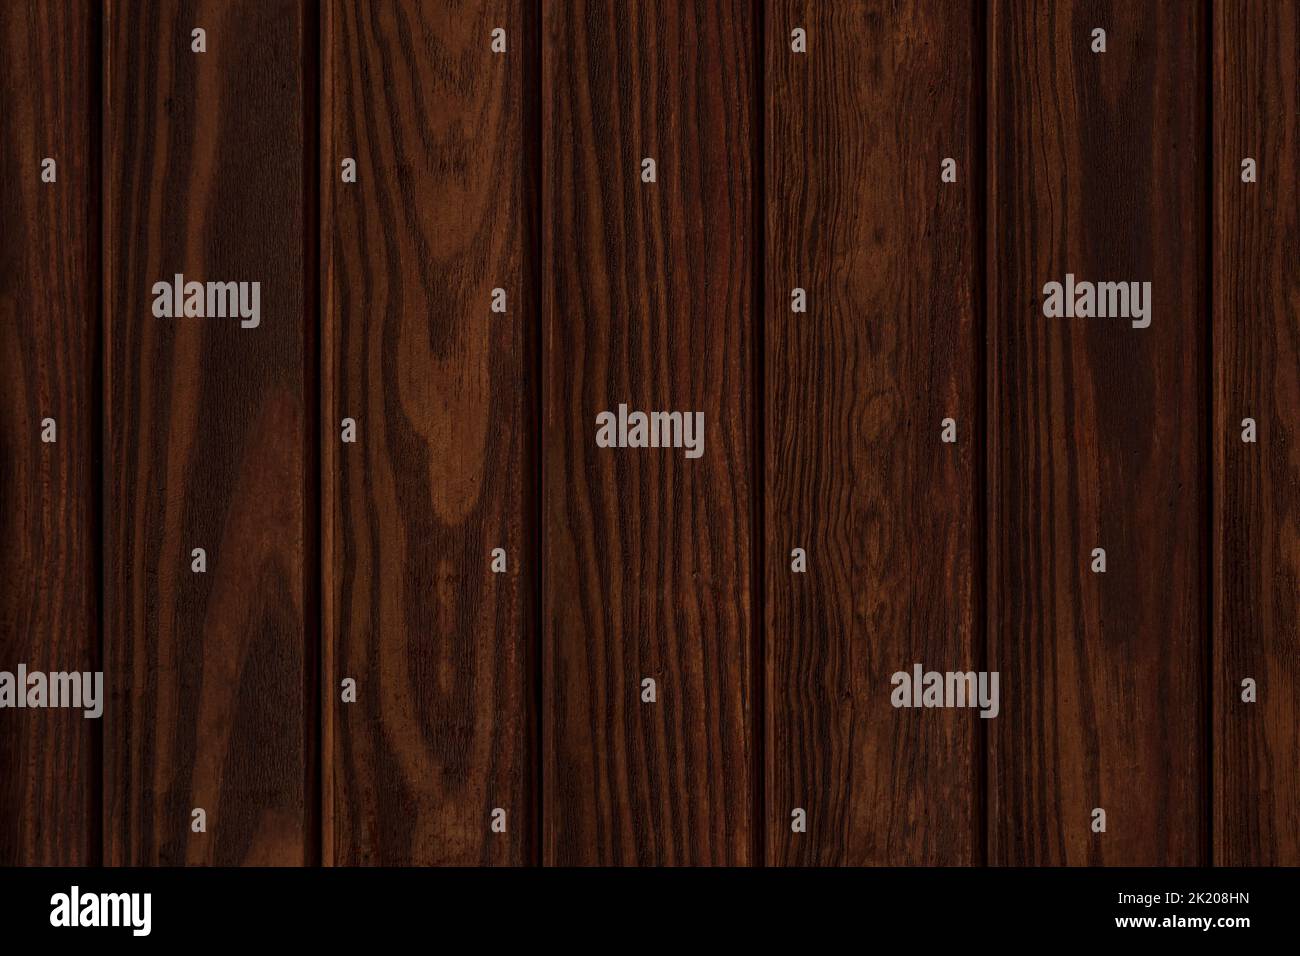 close up of dark brown wooden wall made of planks Stock Photo